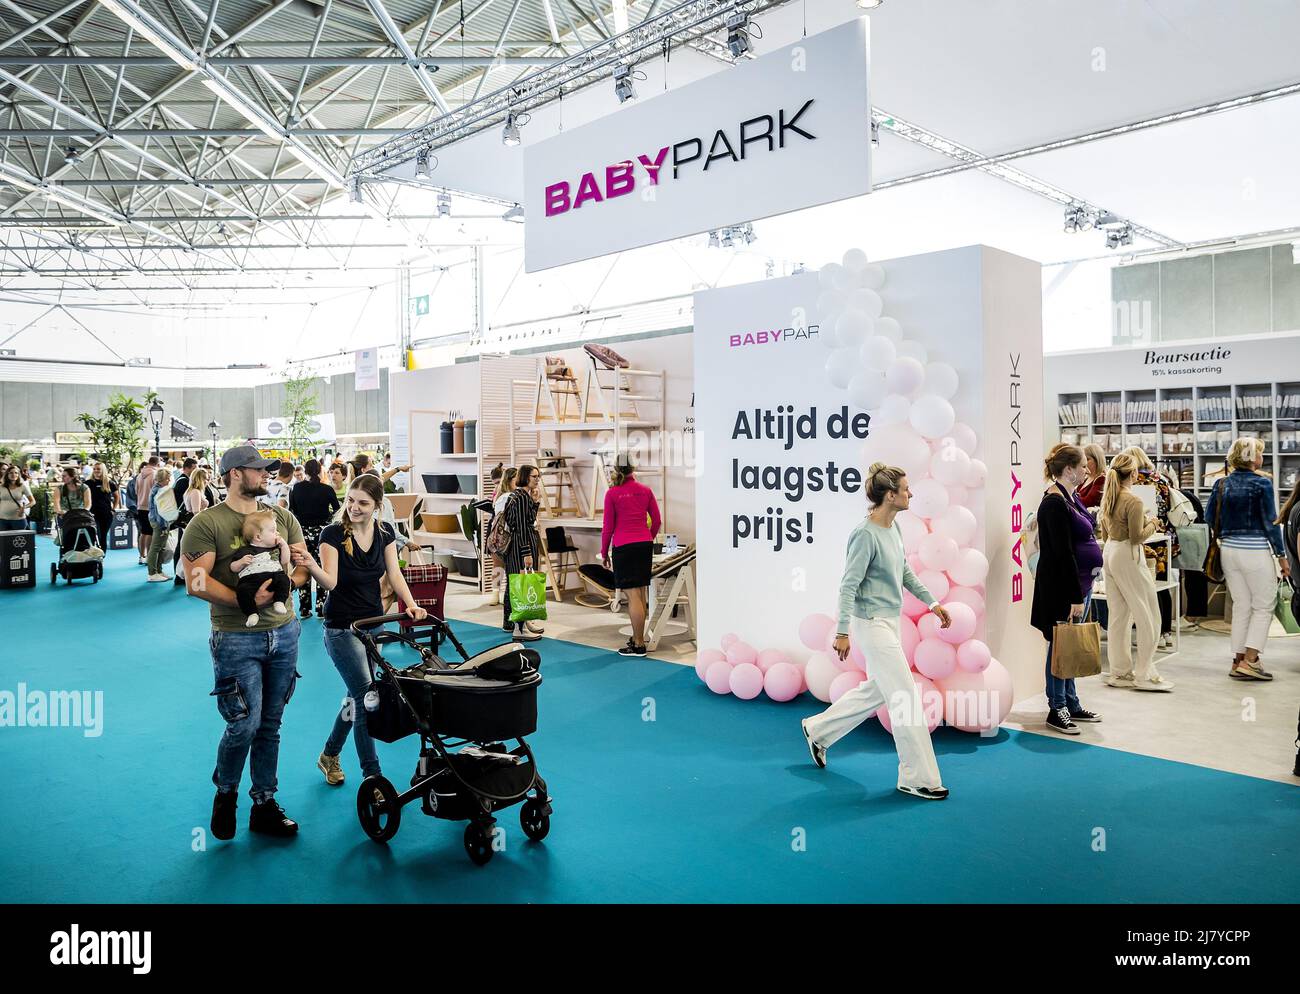 2022-05-11 15:16:08 AMSTERDAM - Visitors on the first day of the Nine Months Fair in the RAI. It is the first time since the outbreak of the corona pandemic that the fair on pregnancy and babies is taking place again. REMKO DE WAAL netherlands out - belgium out Stock Photo